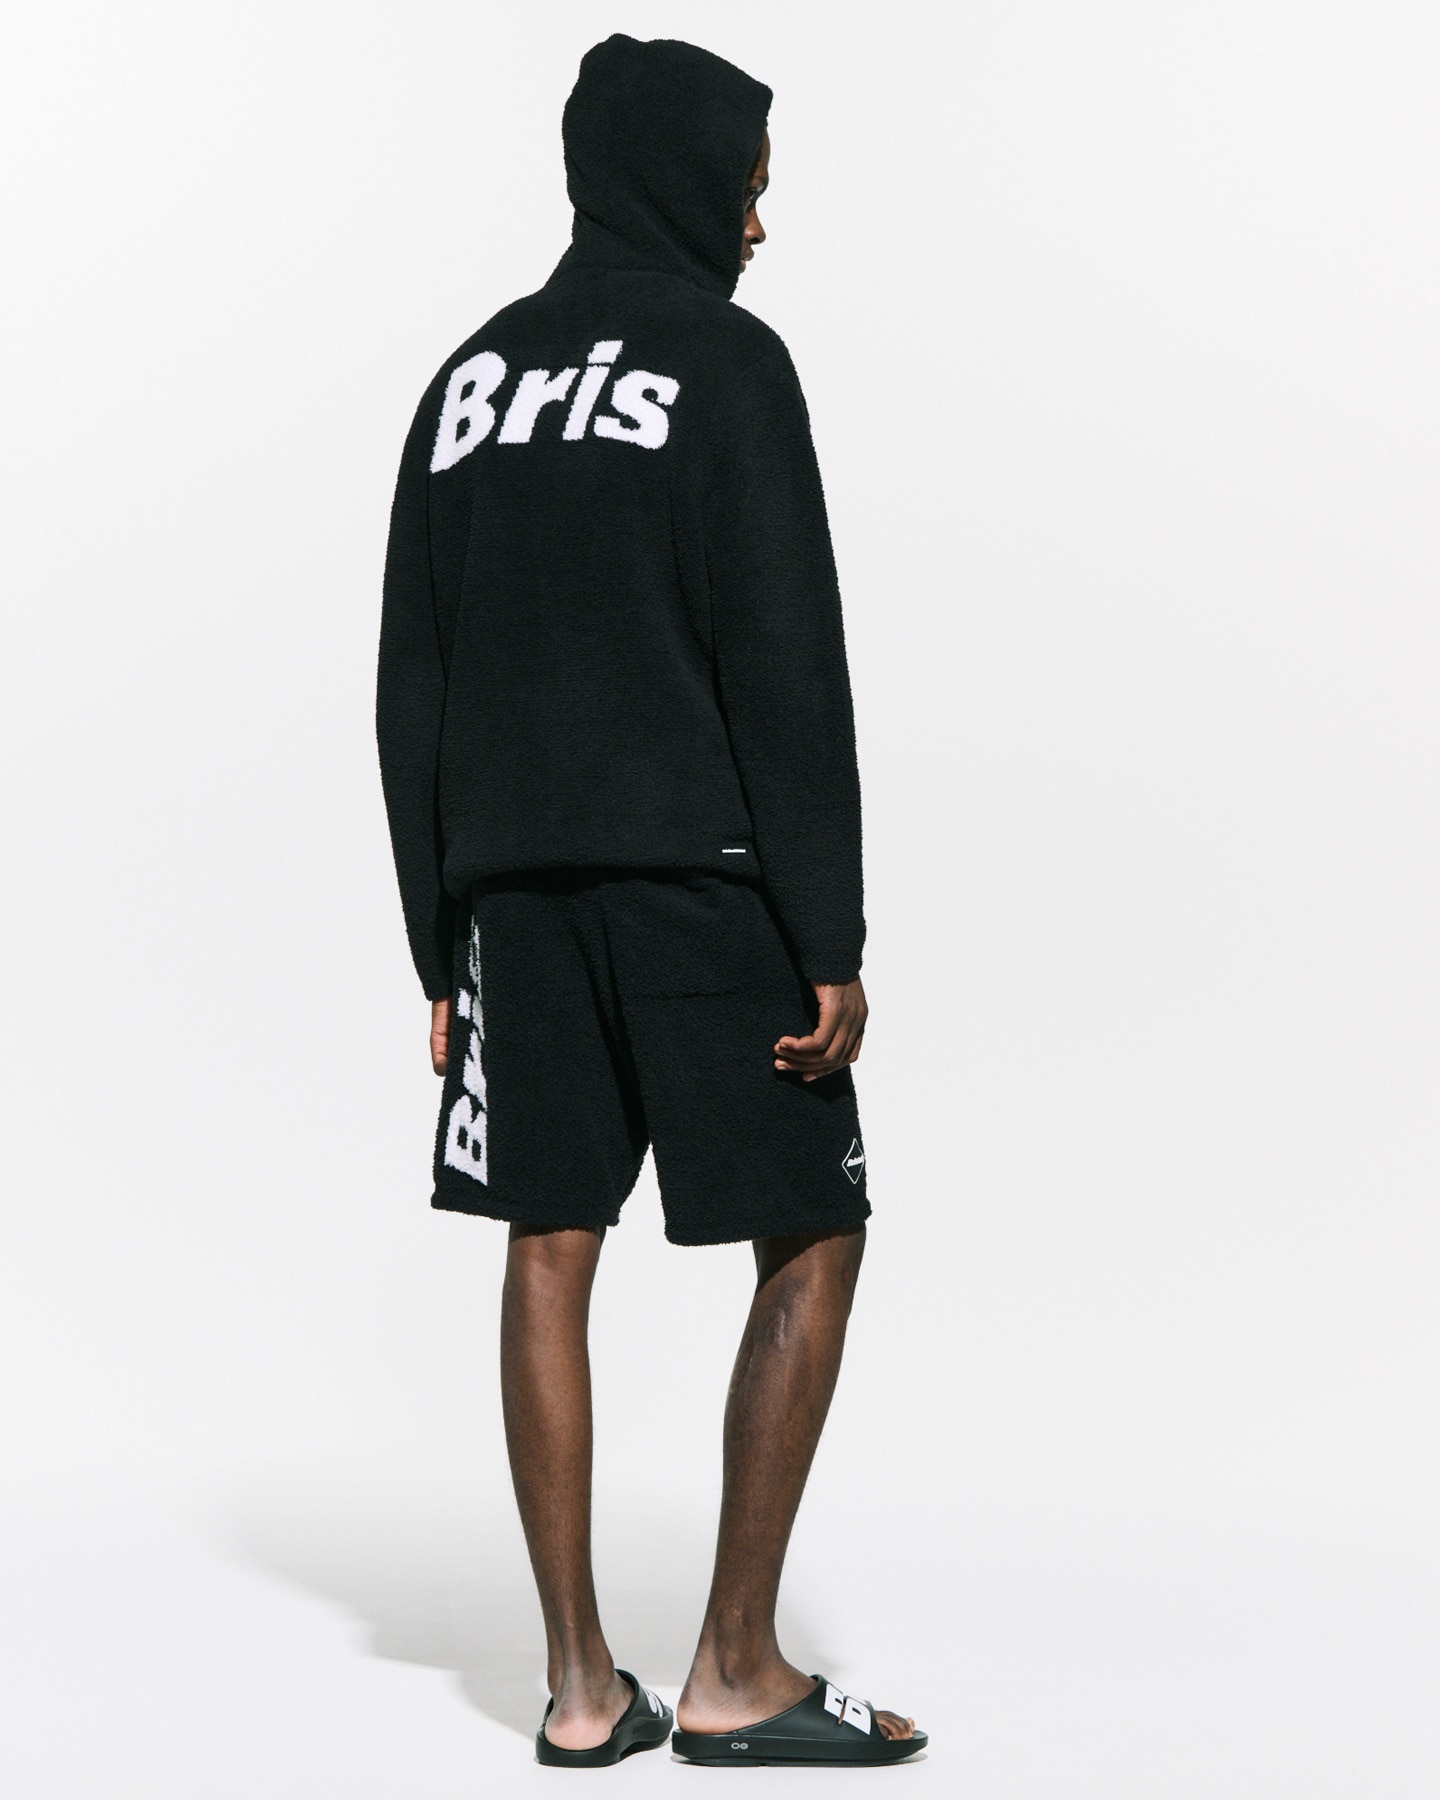 FCRB BAREFOOT DREAMS PILE SHORTS新品未使用品